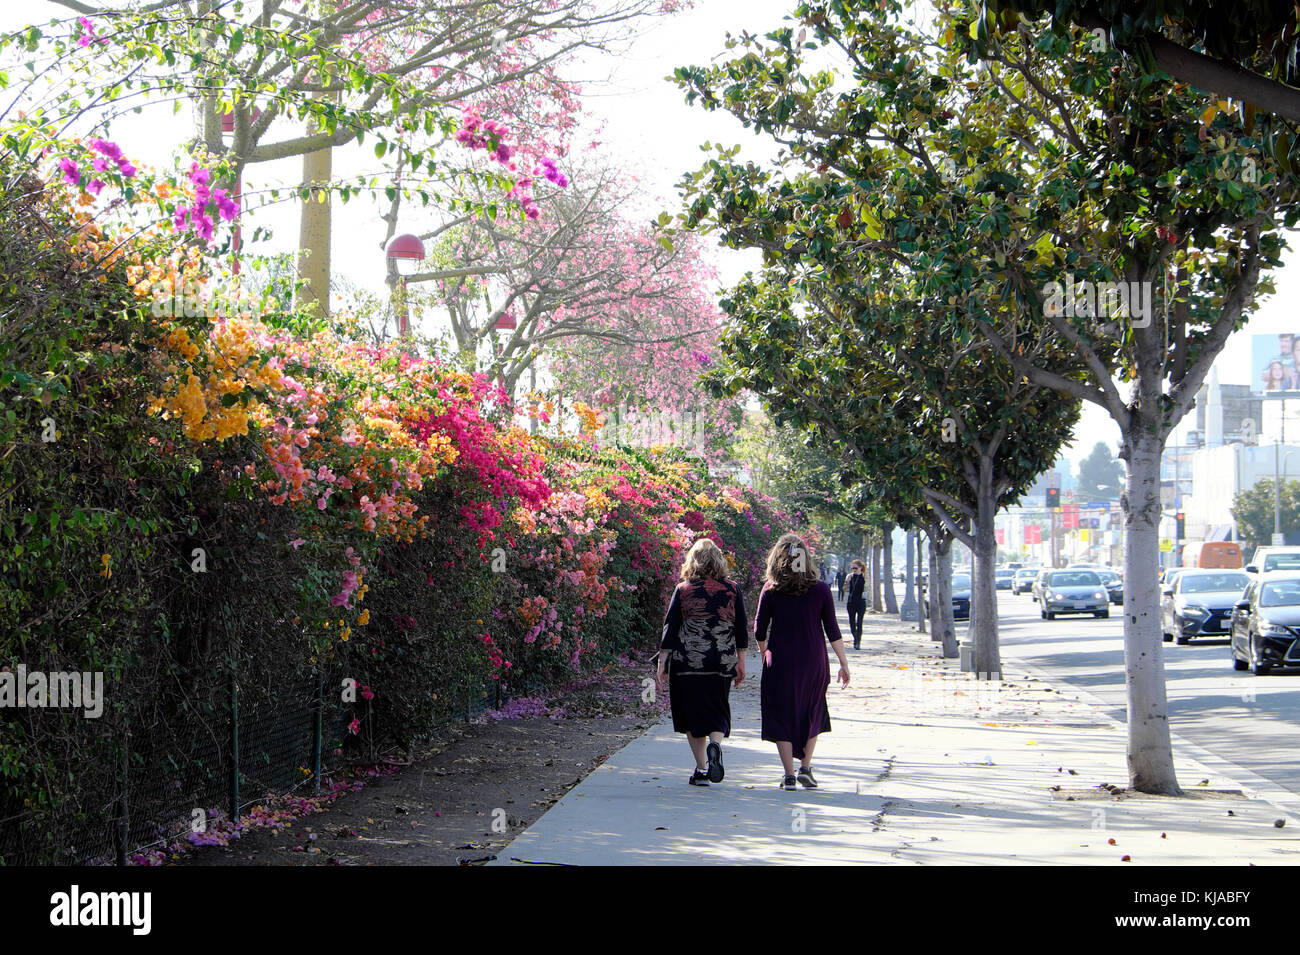 Rear view of two middle-aged women walking next to a fence covered with bougainvillea flowering in October, N Fairfax Ave Los Angeles CA KATHY DEWITT Stock Photo